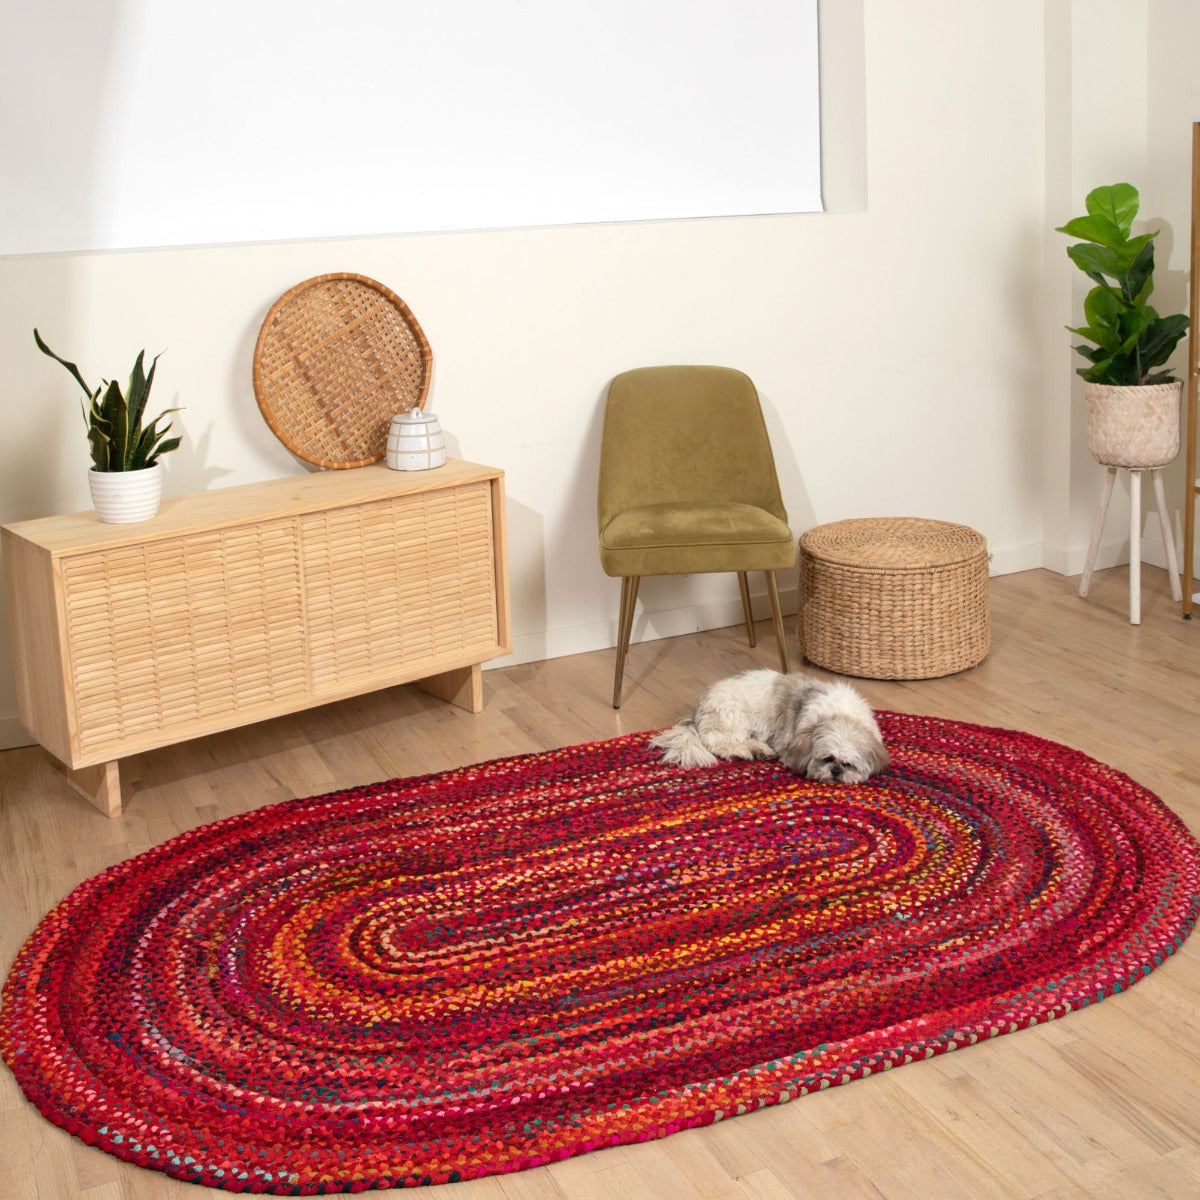 Bohemian Red Cotton Braided Chindi Rugs Oval –